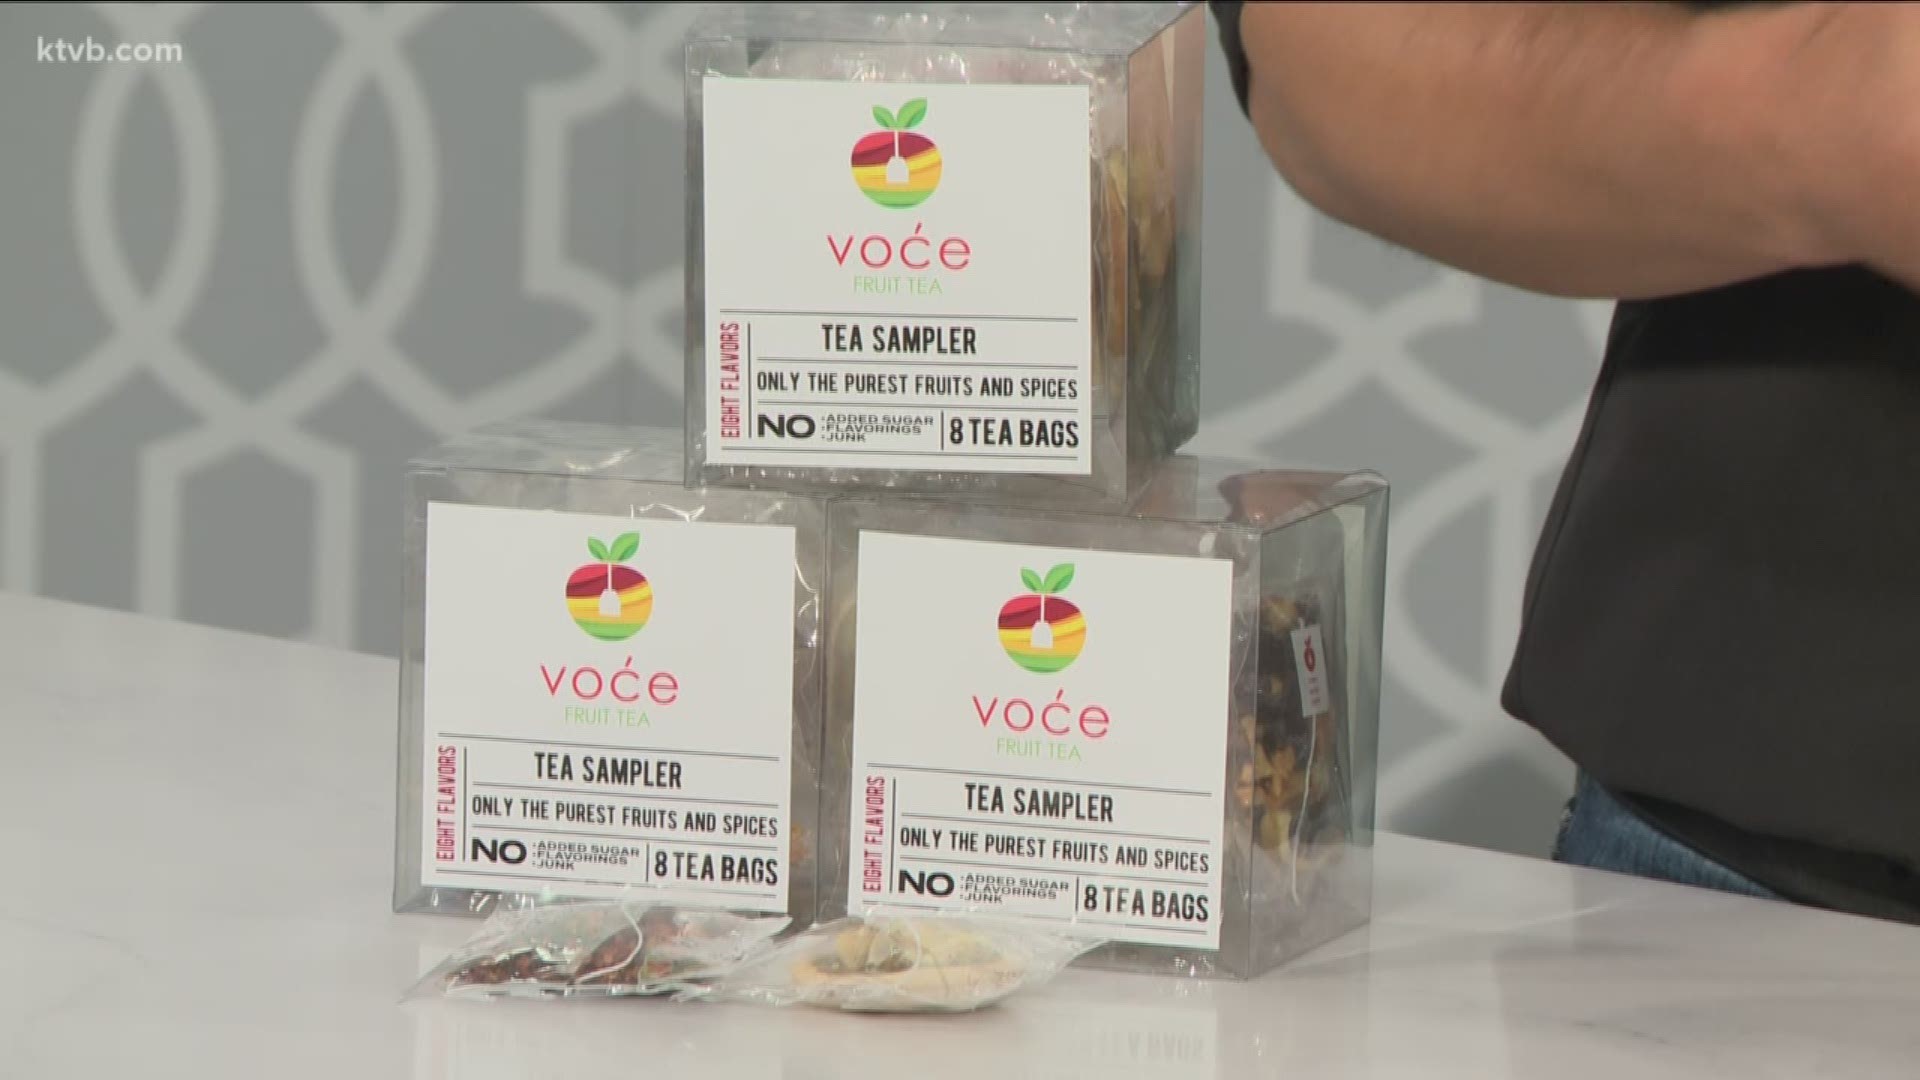 Jeff Snyder-Reinke, the creator of Voce Teas, talks with Dee Sarton about his product.